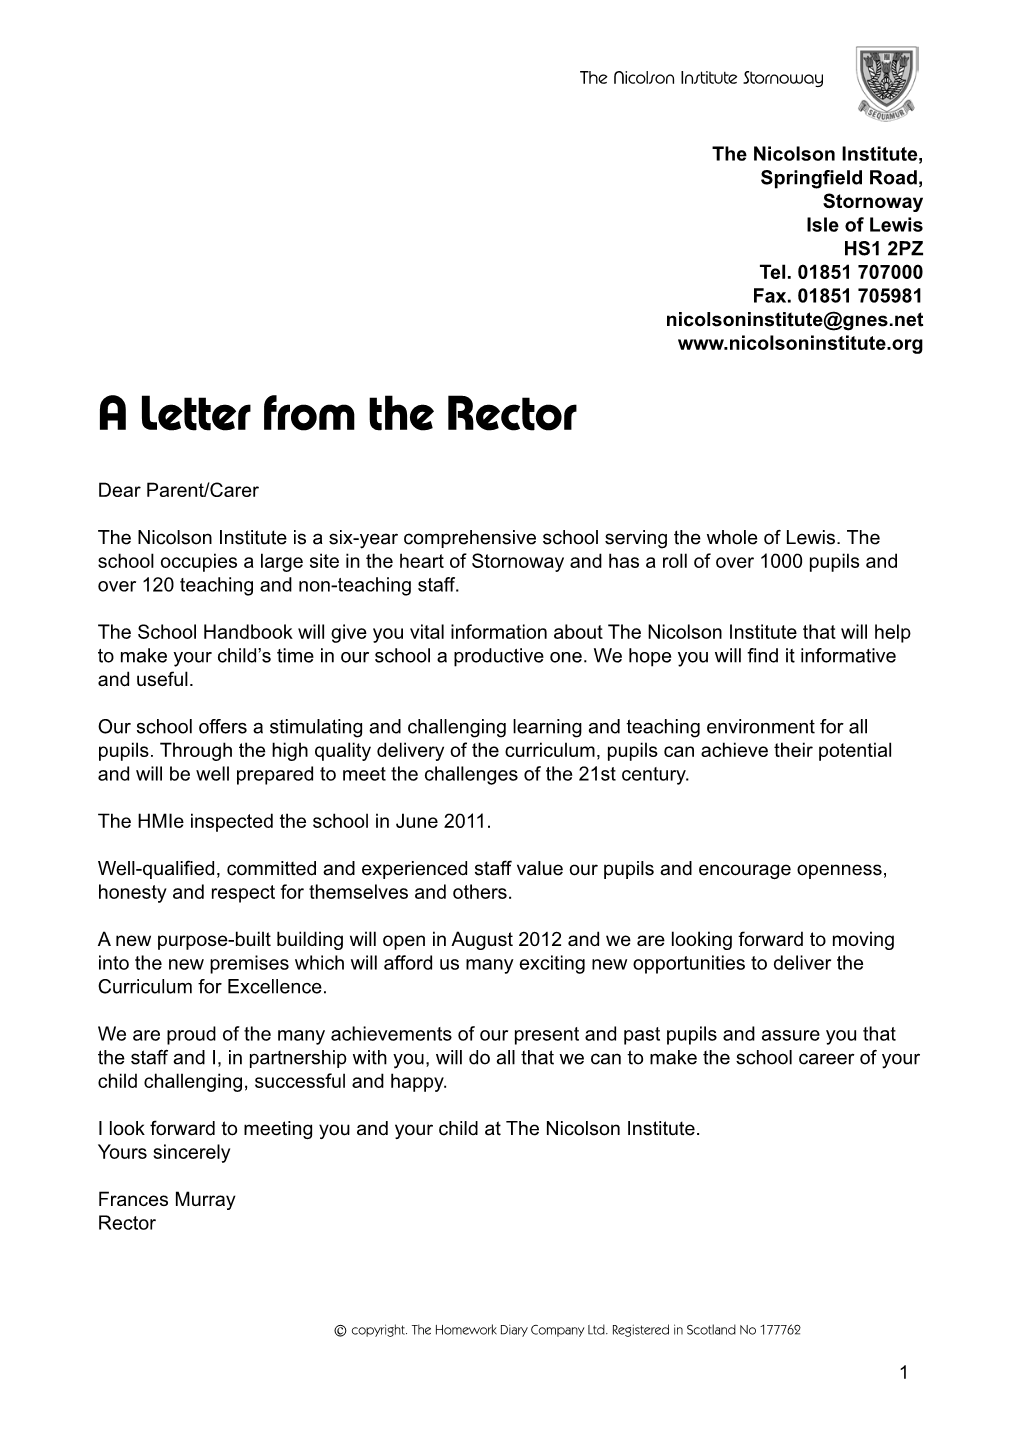 A Letter from the Rector